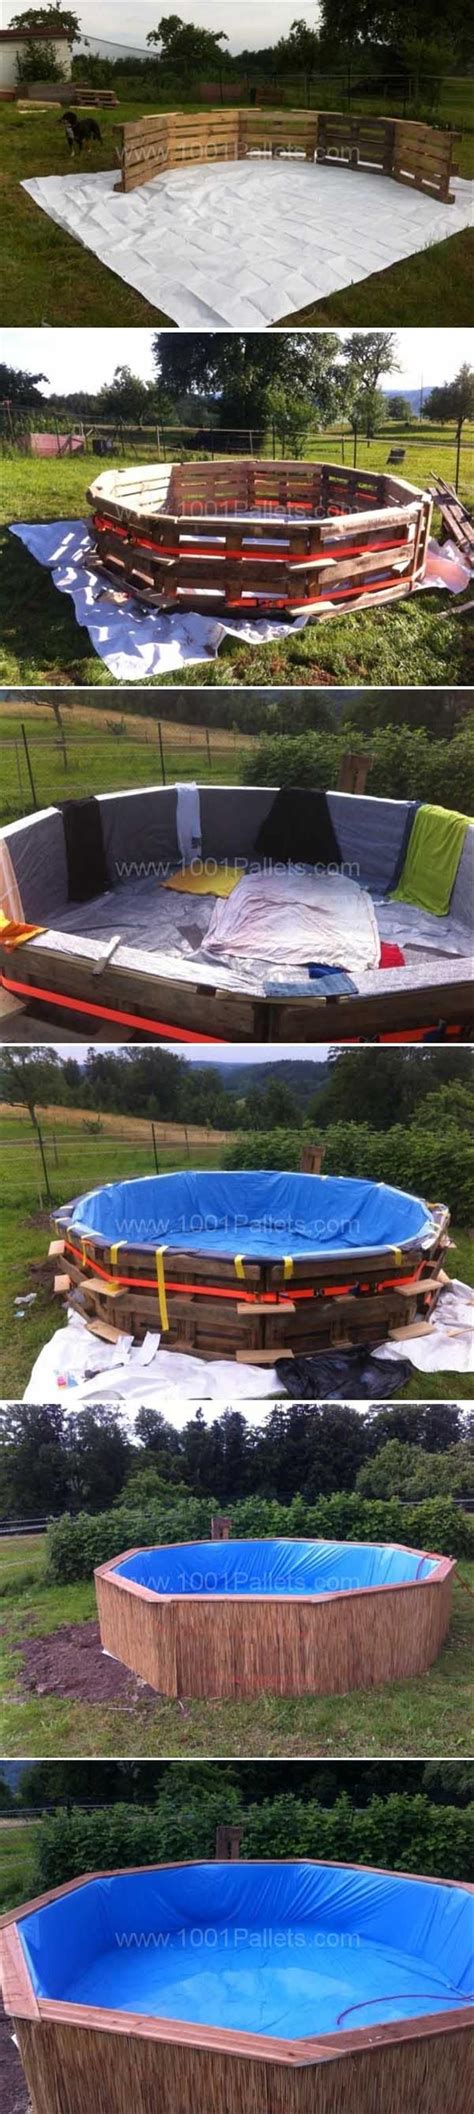 39 best redneck swimming pools images on pinterest swimming pools